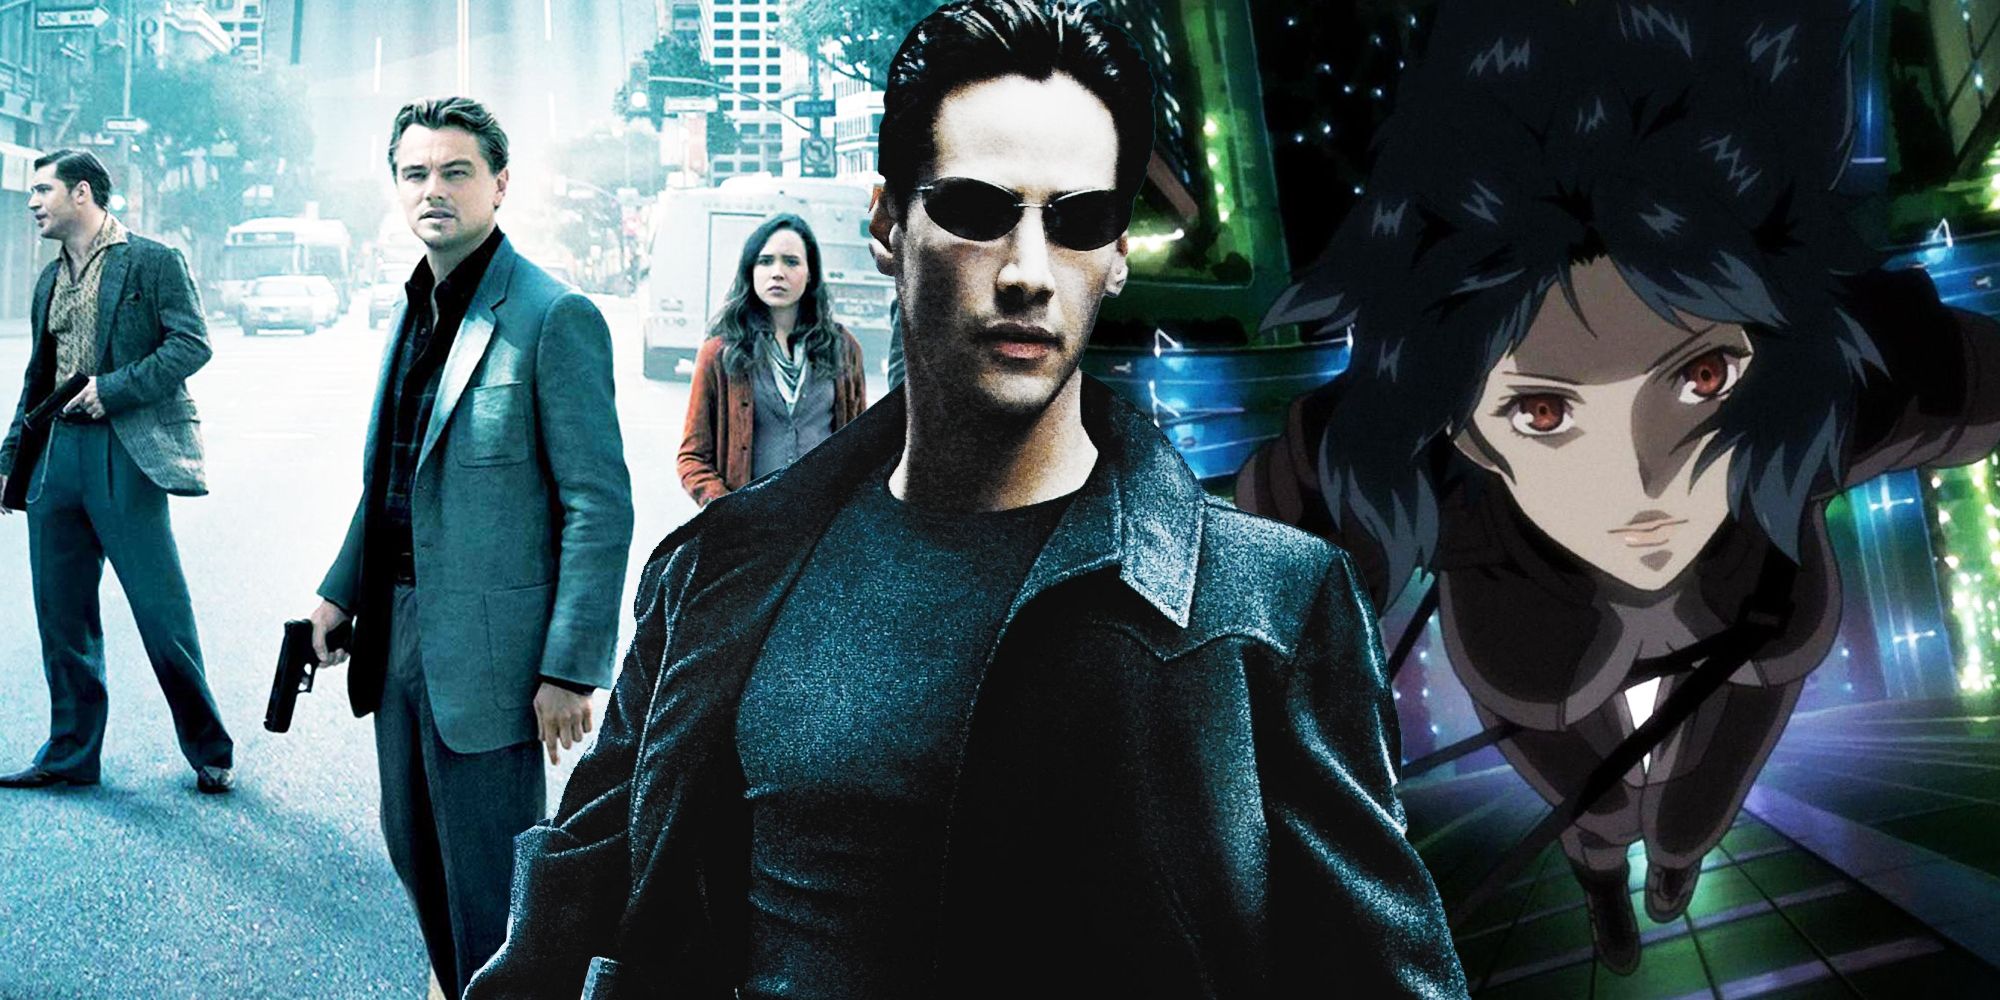 The Matrix, Inception, and Ghost in the Shell